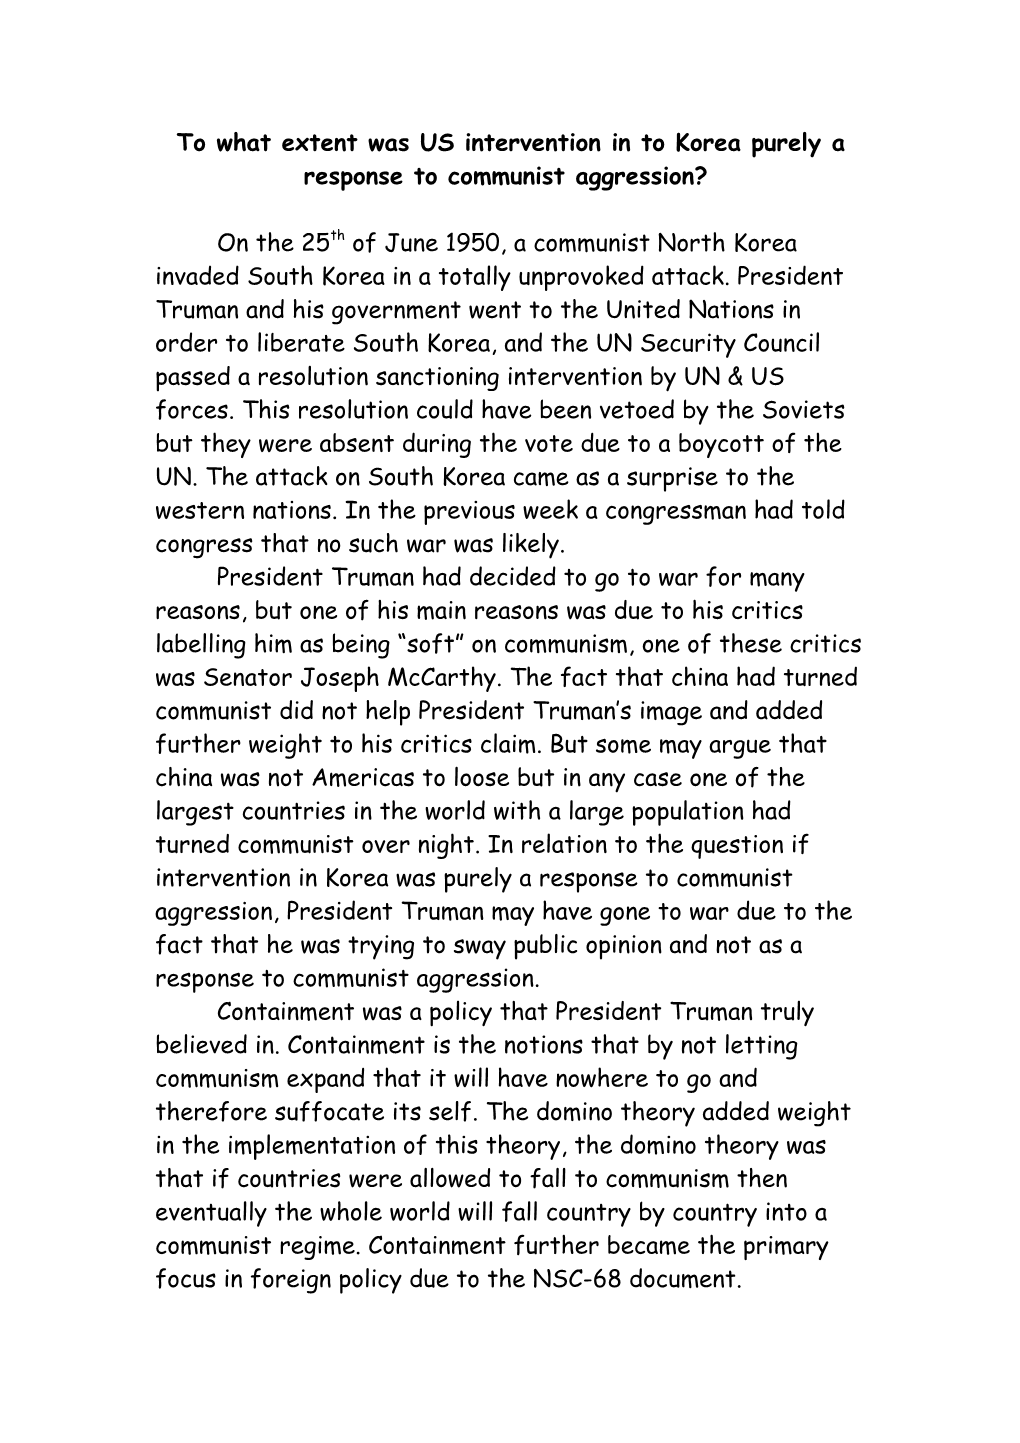 To What Extent Was US Intervention in to Korea Purely a Response to Communist Aggression